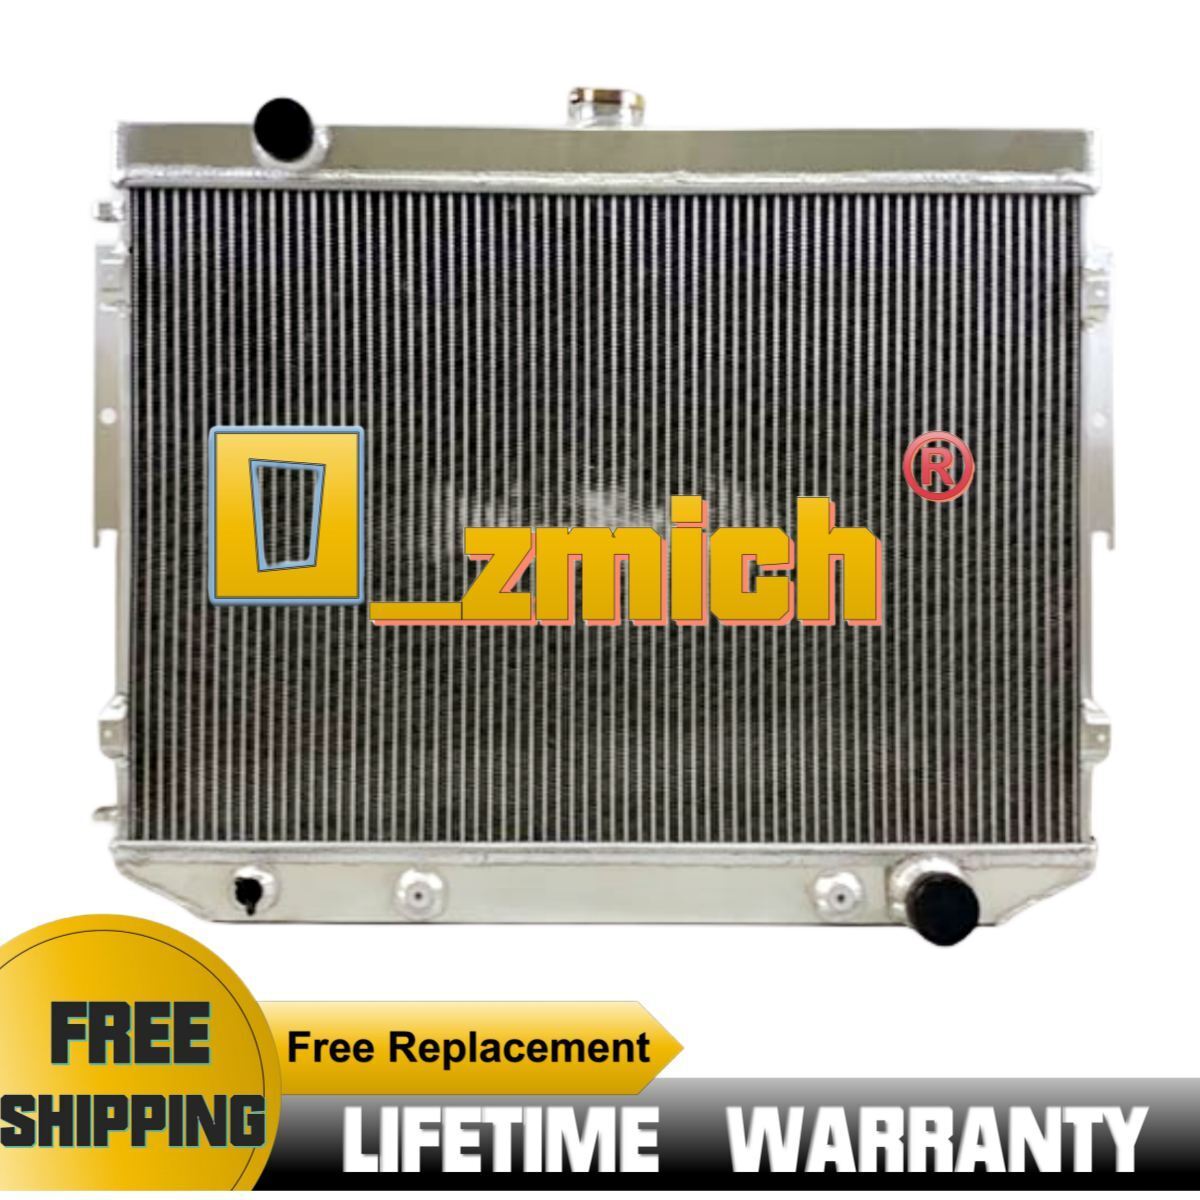 3 Row CoreRadiator Fits 1973 1974 Dodge Coronet CHARGER PLYMOUTH SATELLITE 7.2L